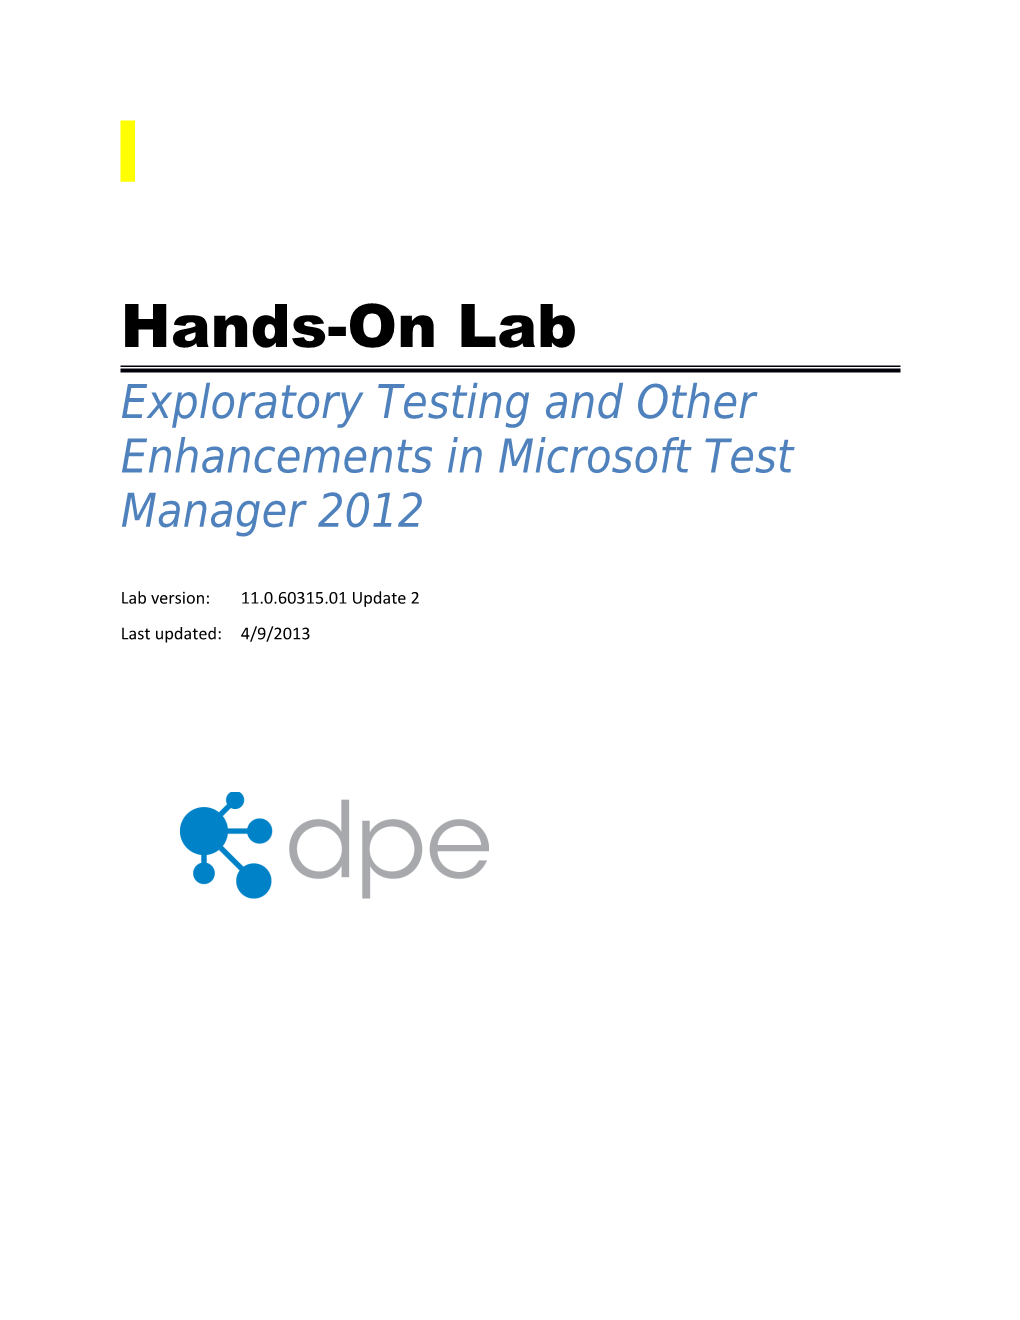 Exploratory Testing and Other Enhancements in Microsoft Test Manager 2012